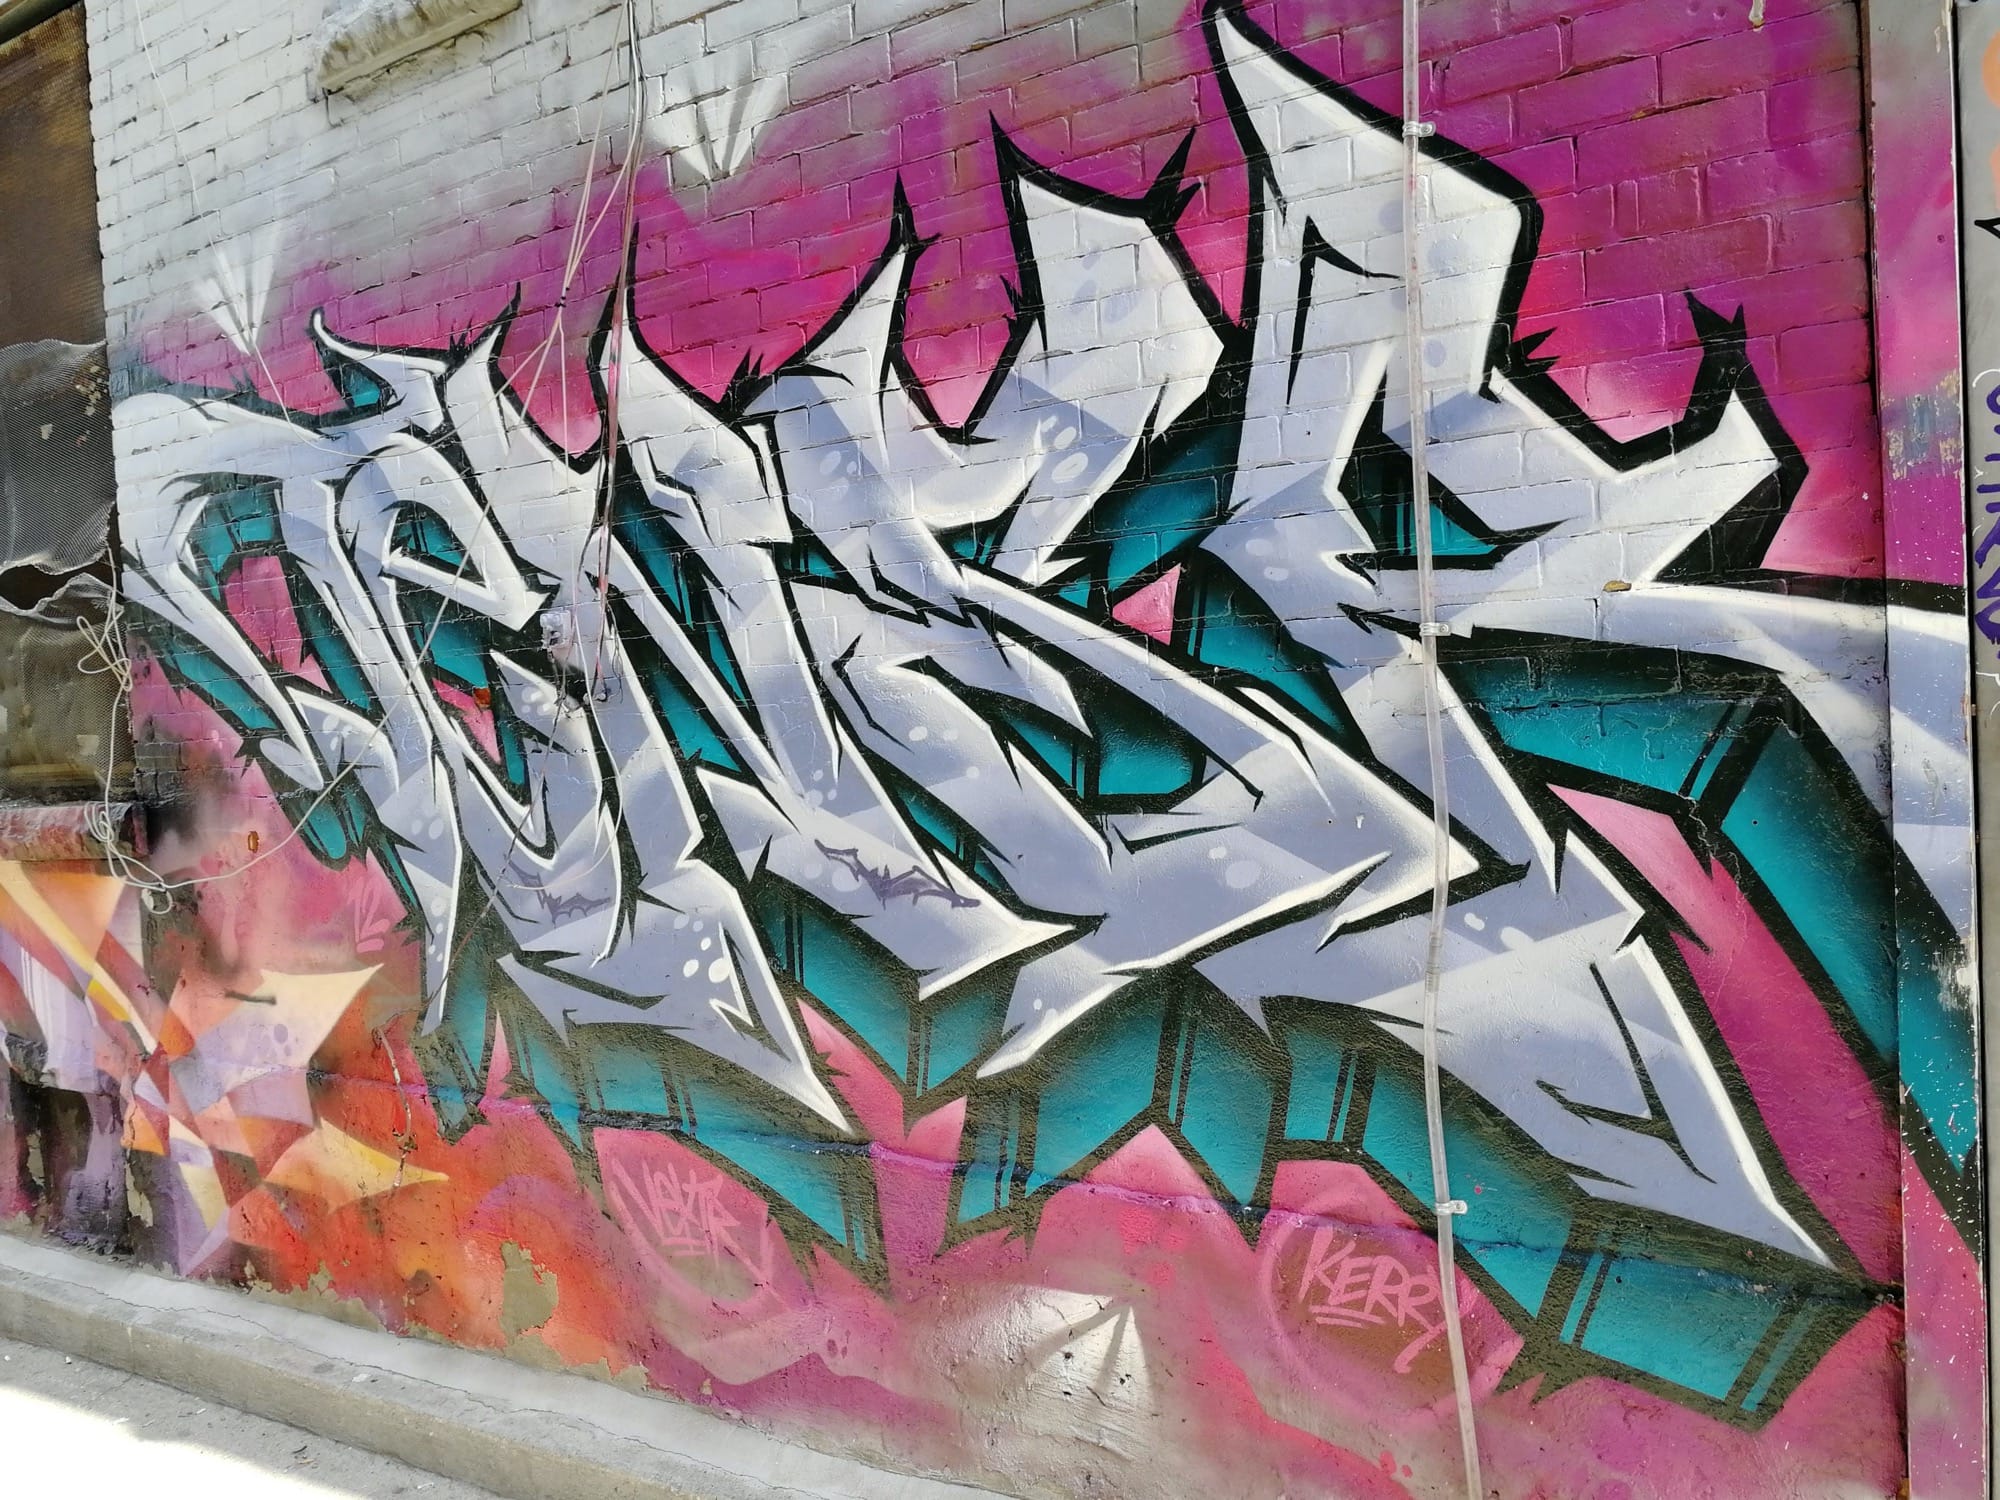 Graffiti 2385  captured by Rabot in Toronto Canada